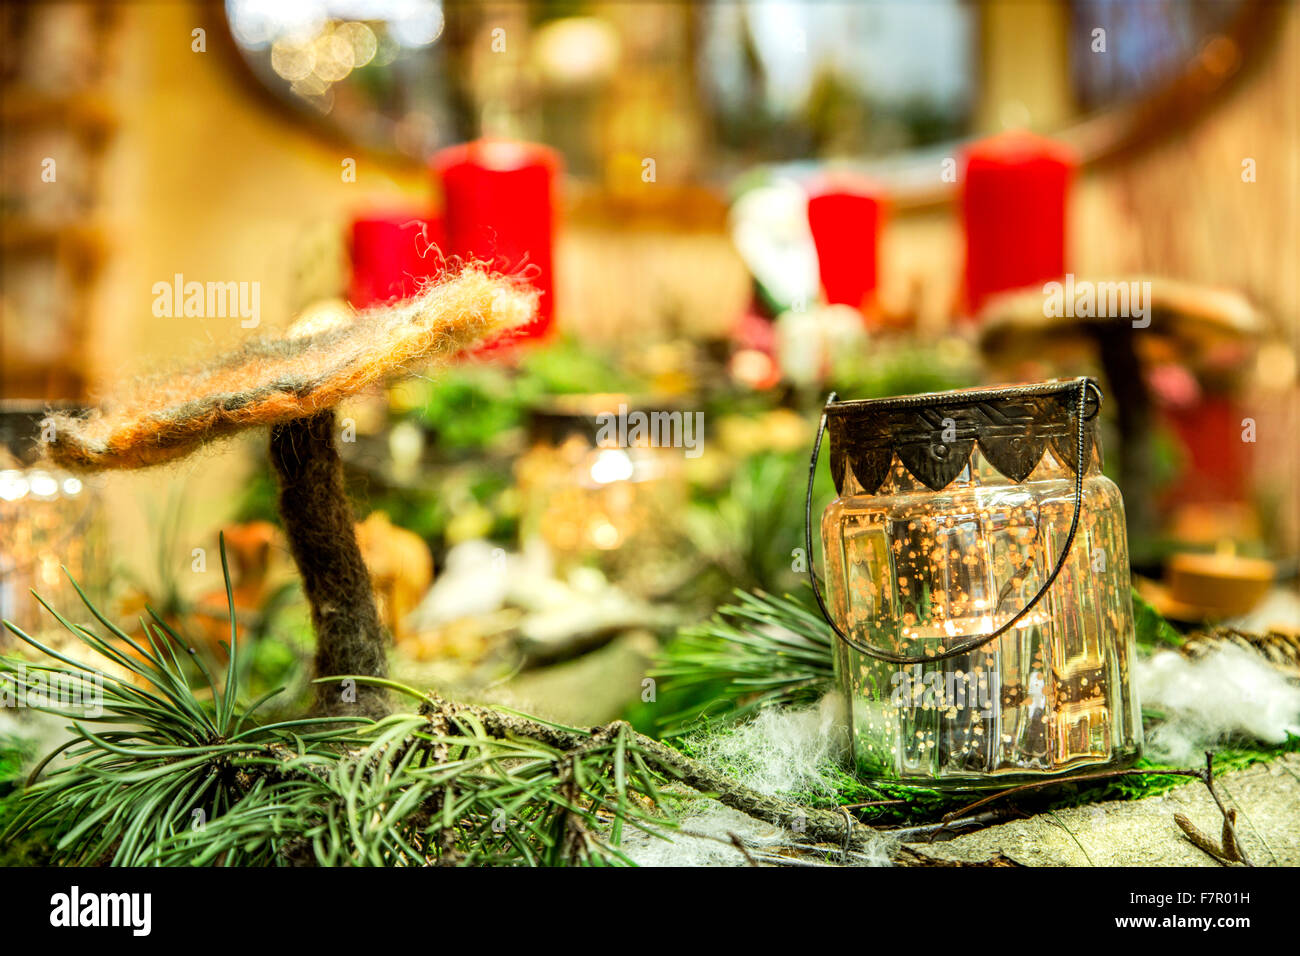 Close look to an advent wreath with handmade felt mushroom and candle illuminated glass potty in the foreground Stock Photo